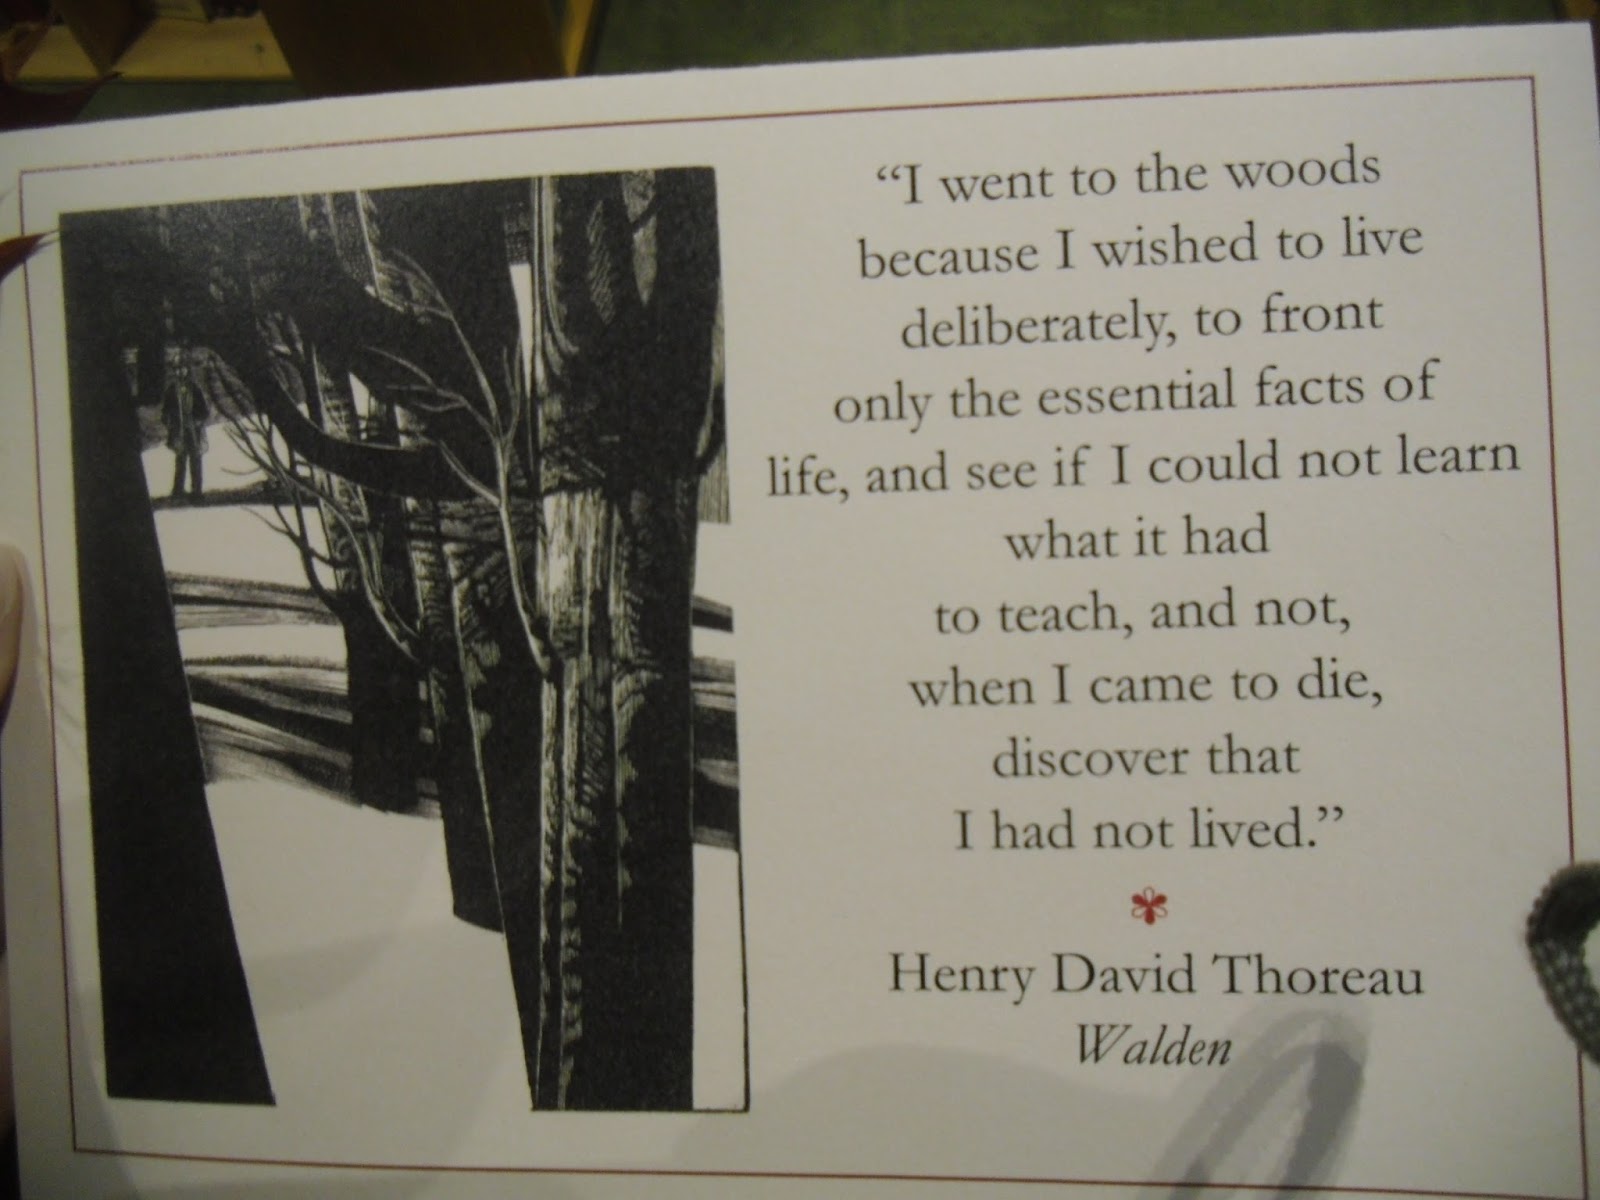 Another thing I found in the t store was the postcard here which says one of my favorite quotes from Thoreau This is what I mean when I say that "